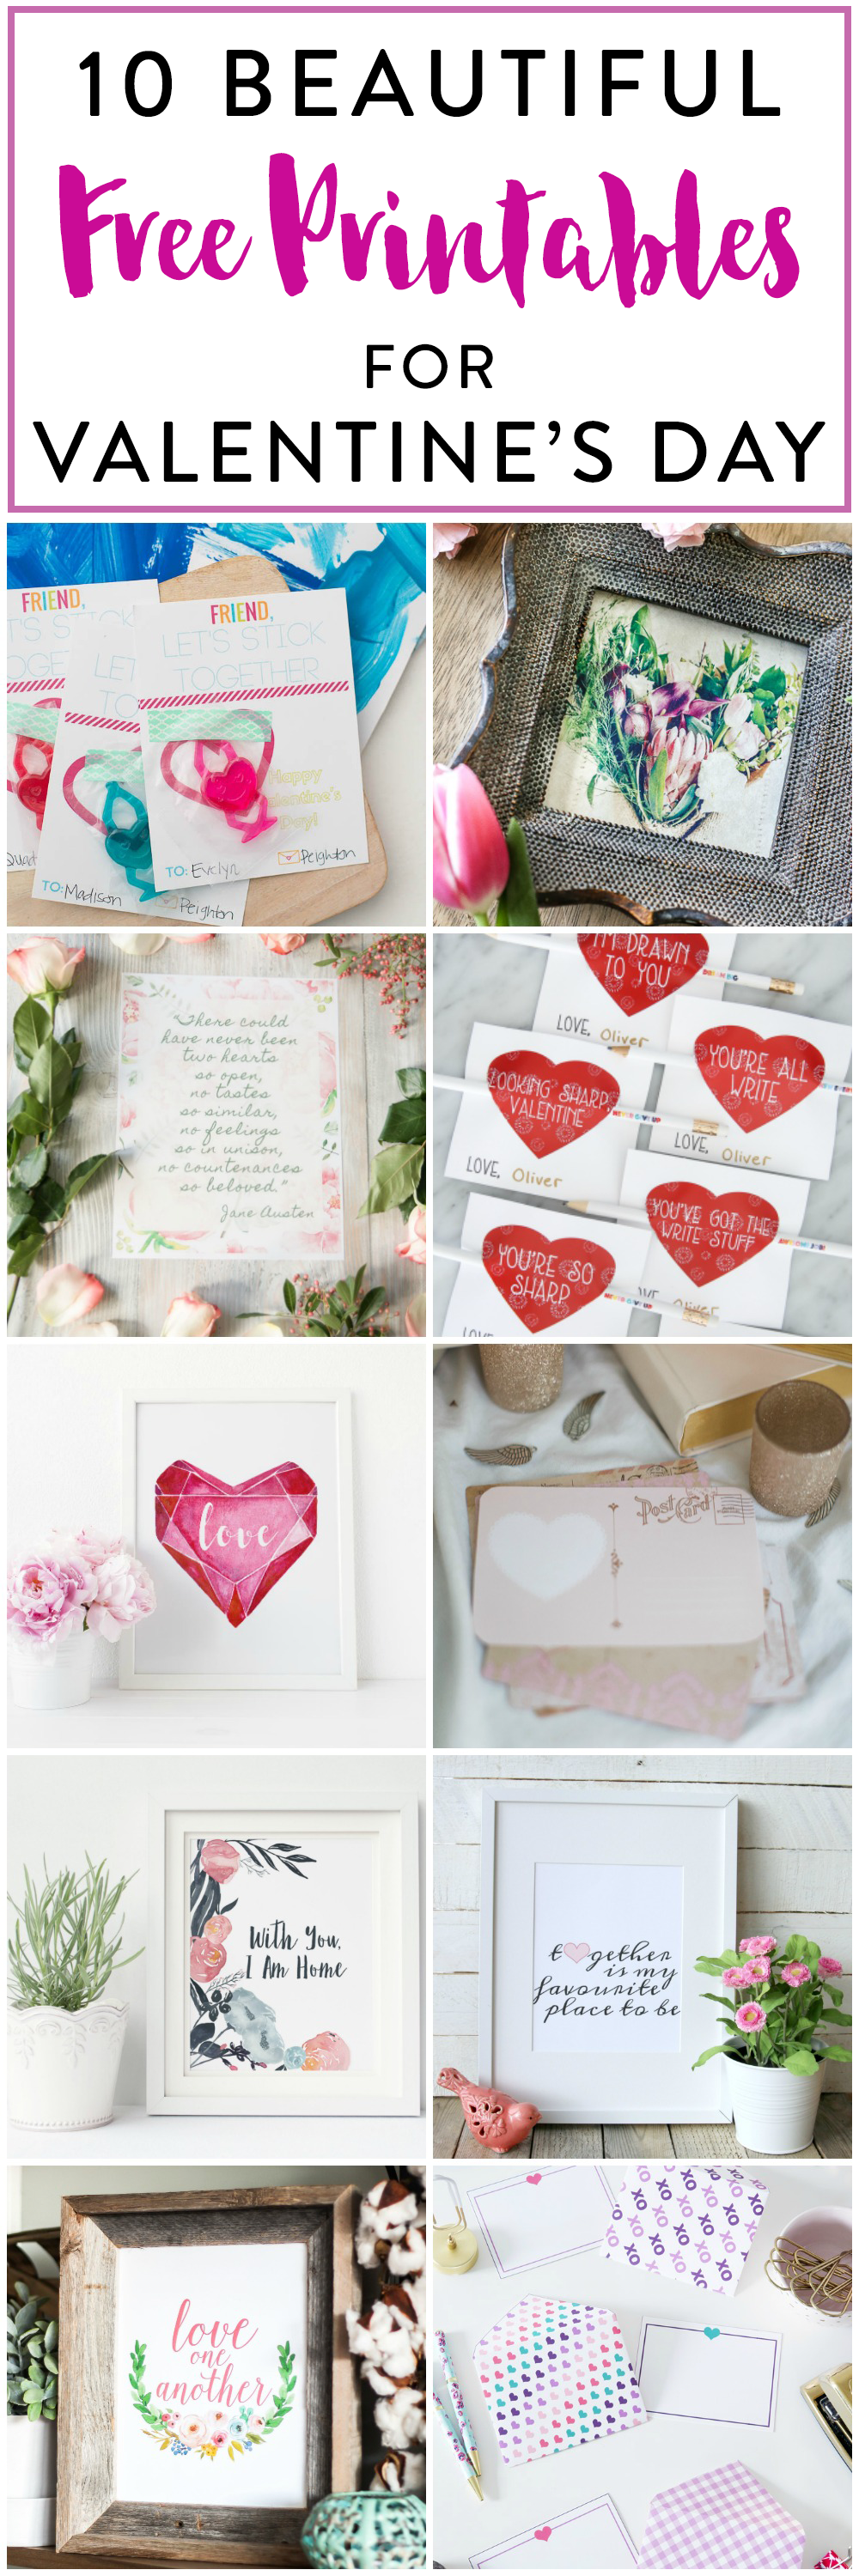 10 Beautiful Free Printables For Valentines Day poster.